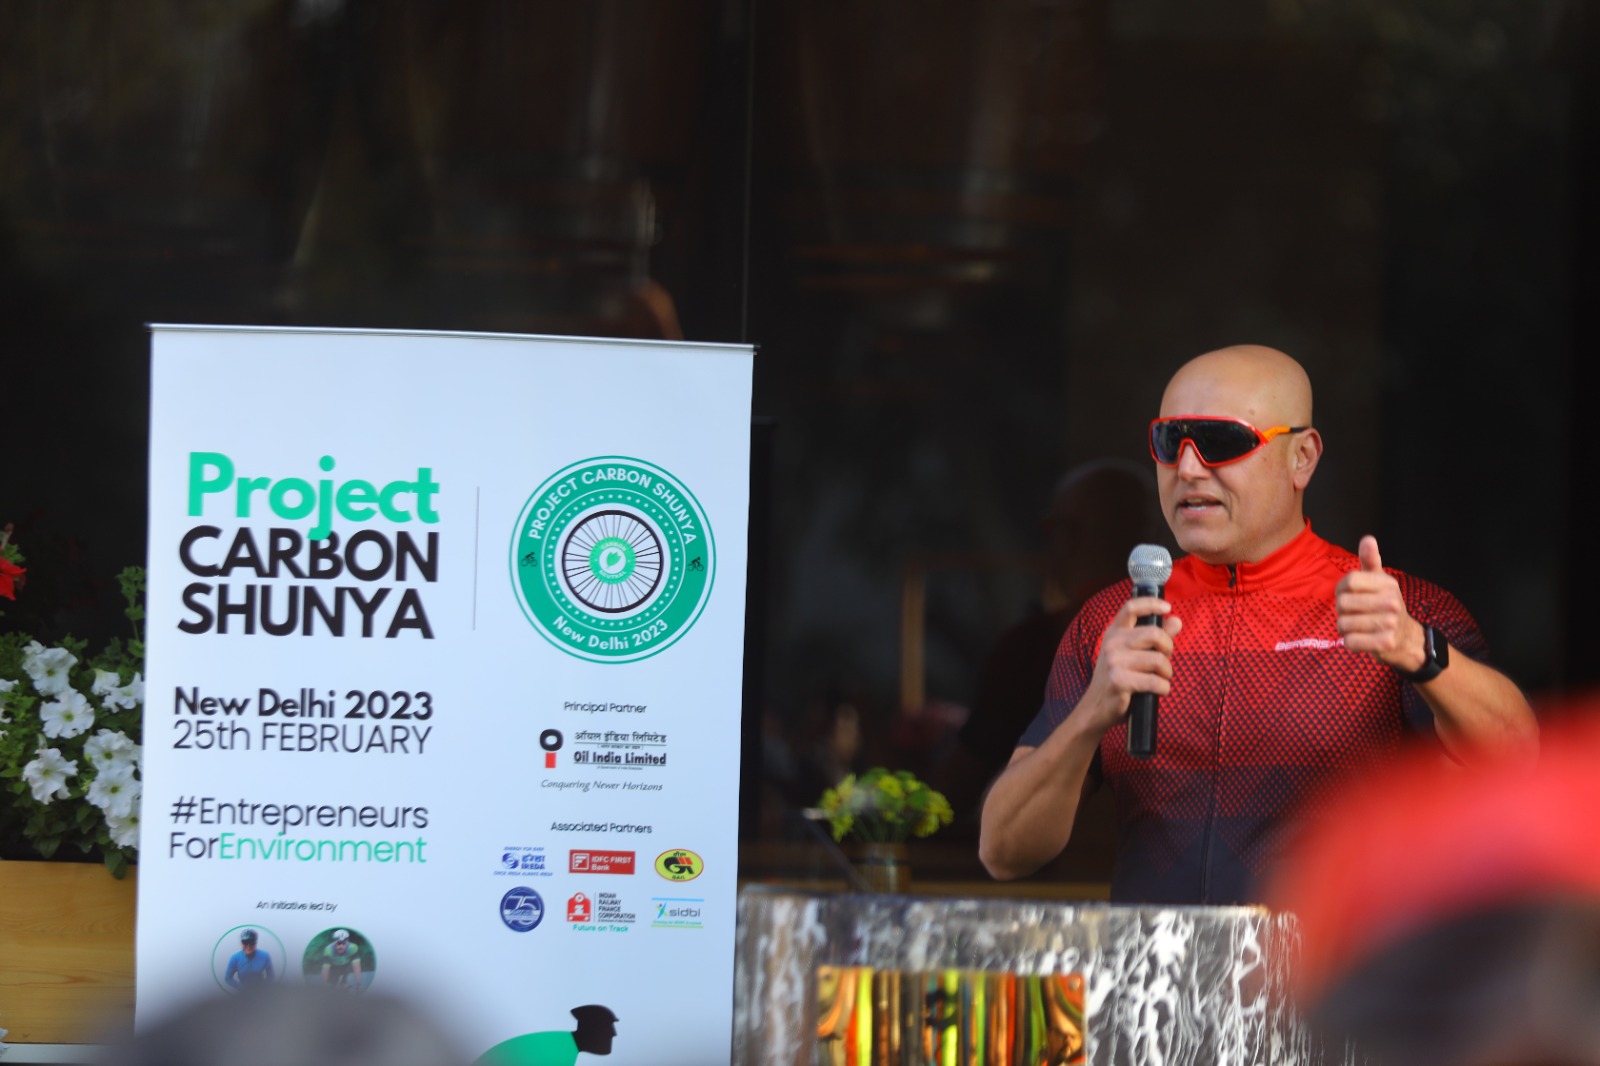 Hotmail & Showreel Founder Sabeer Bhatia Advocates for Zero Carbon Emission - Launches First Edition of Project Carbon Shunya in Delhi